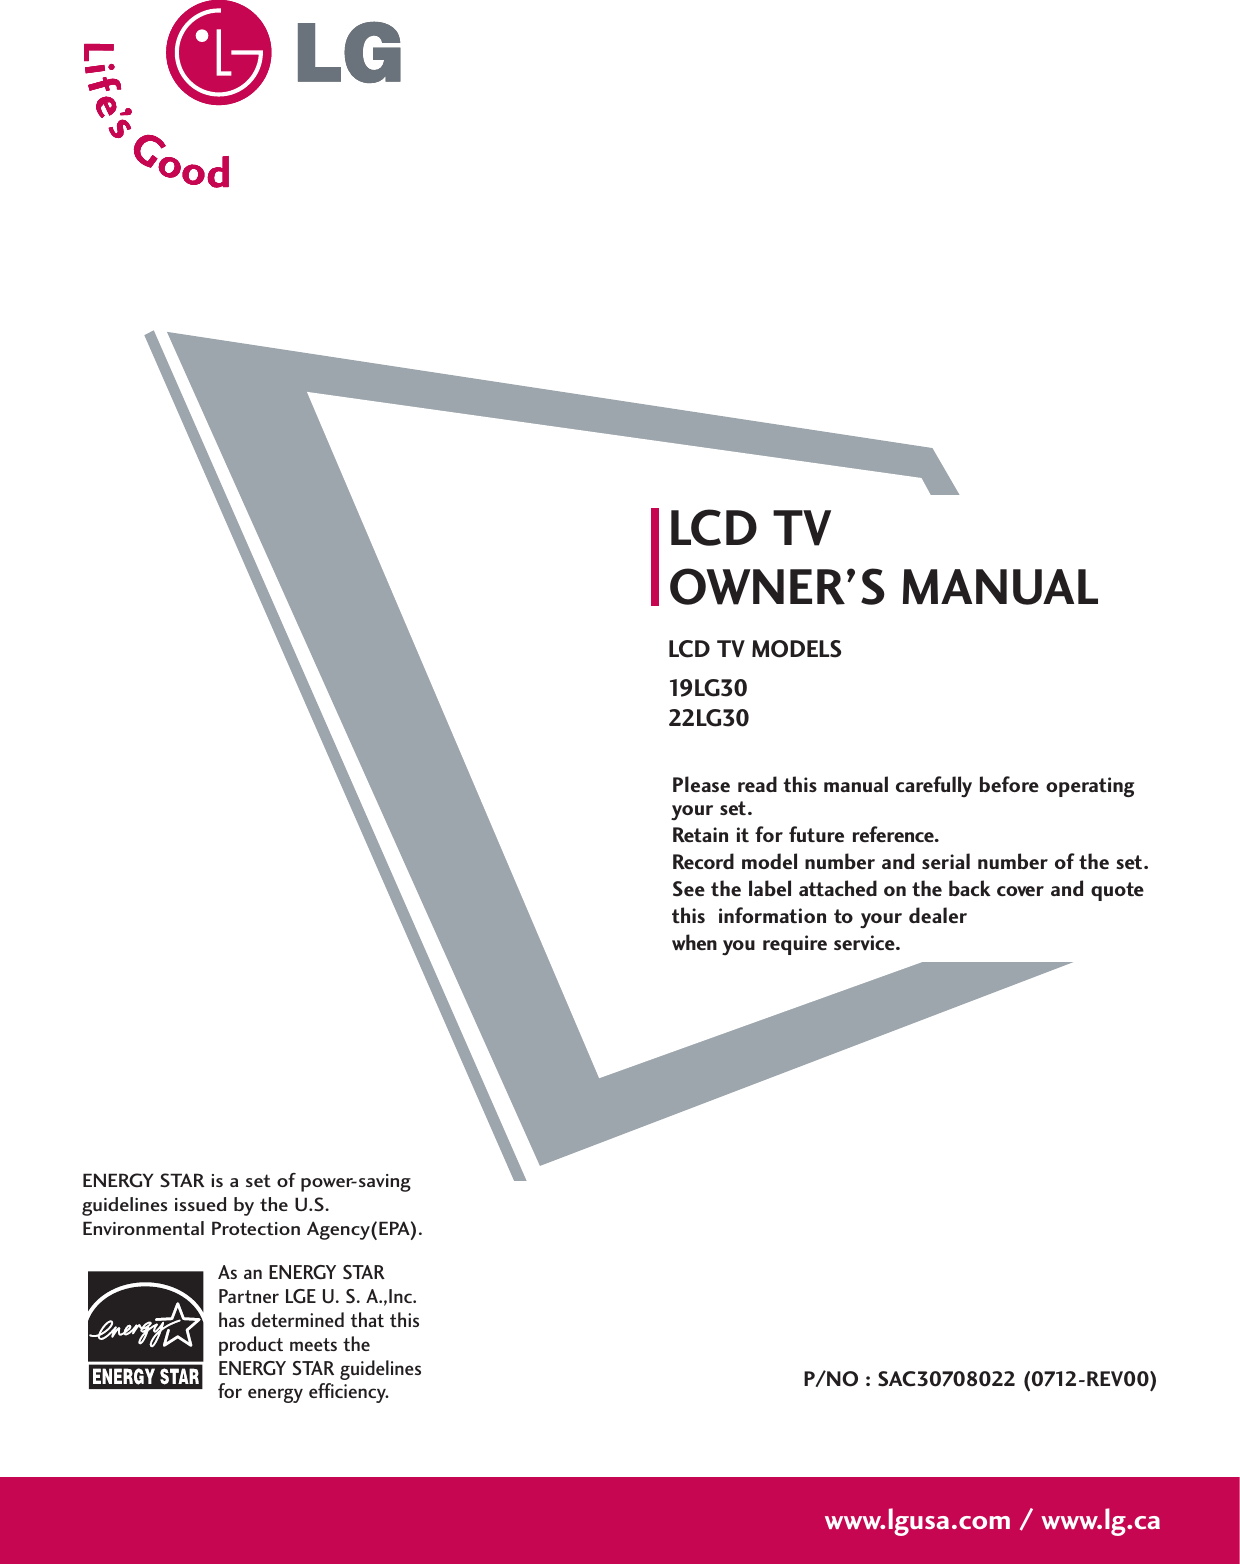 Please read this manual carefully before operatingyour set. Retain it for future reference.Record model number and serial number of the set. See the label attached on the back cover and quote this  information to your dealer when you require service.LCD TVOWNER’S MANUALLCD TV MODELS19 LG 3022LG30P/NO : SAC30708022 (0712-REV00)www.lgusa.com / www.lg.caAs an ENERGY STARPartner LGE U. S. A.,Inc.has determined that thisproduct meets theENERGY STAR guidelinesfor energy efficiency.ENERGY STAR is a set of power-savingguidelines issued by the U.S.Environmental Protection Agency(EPA).